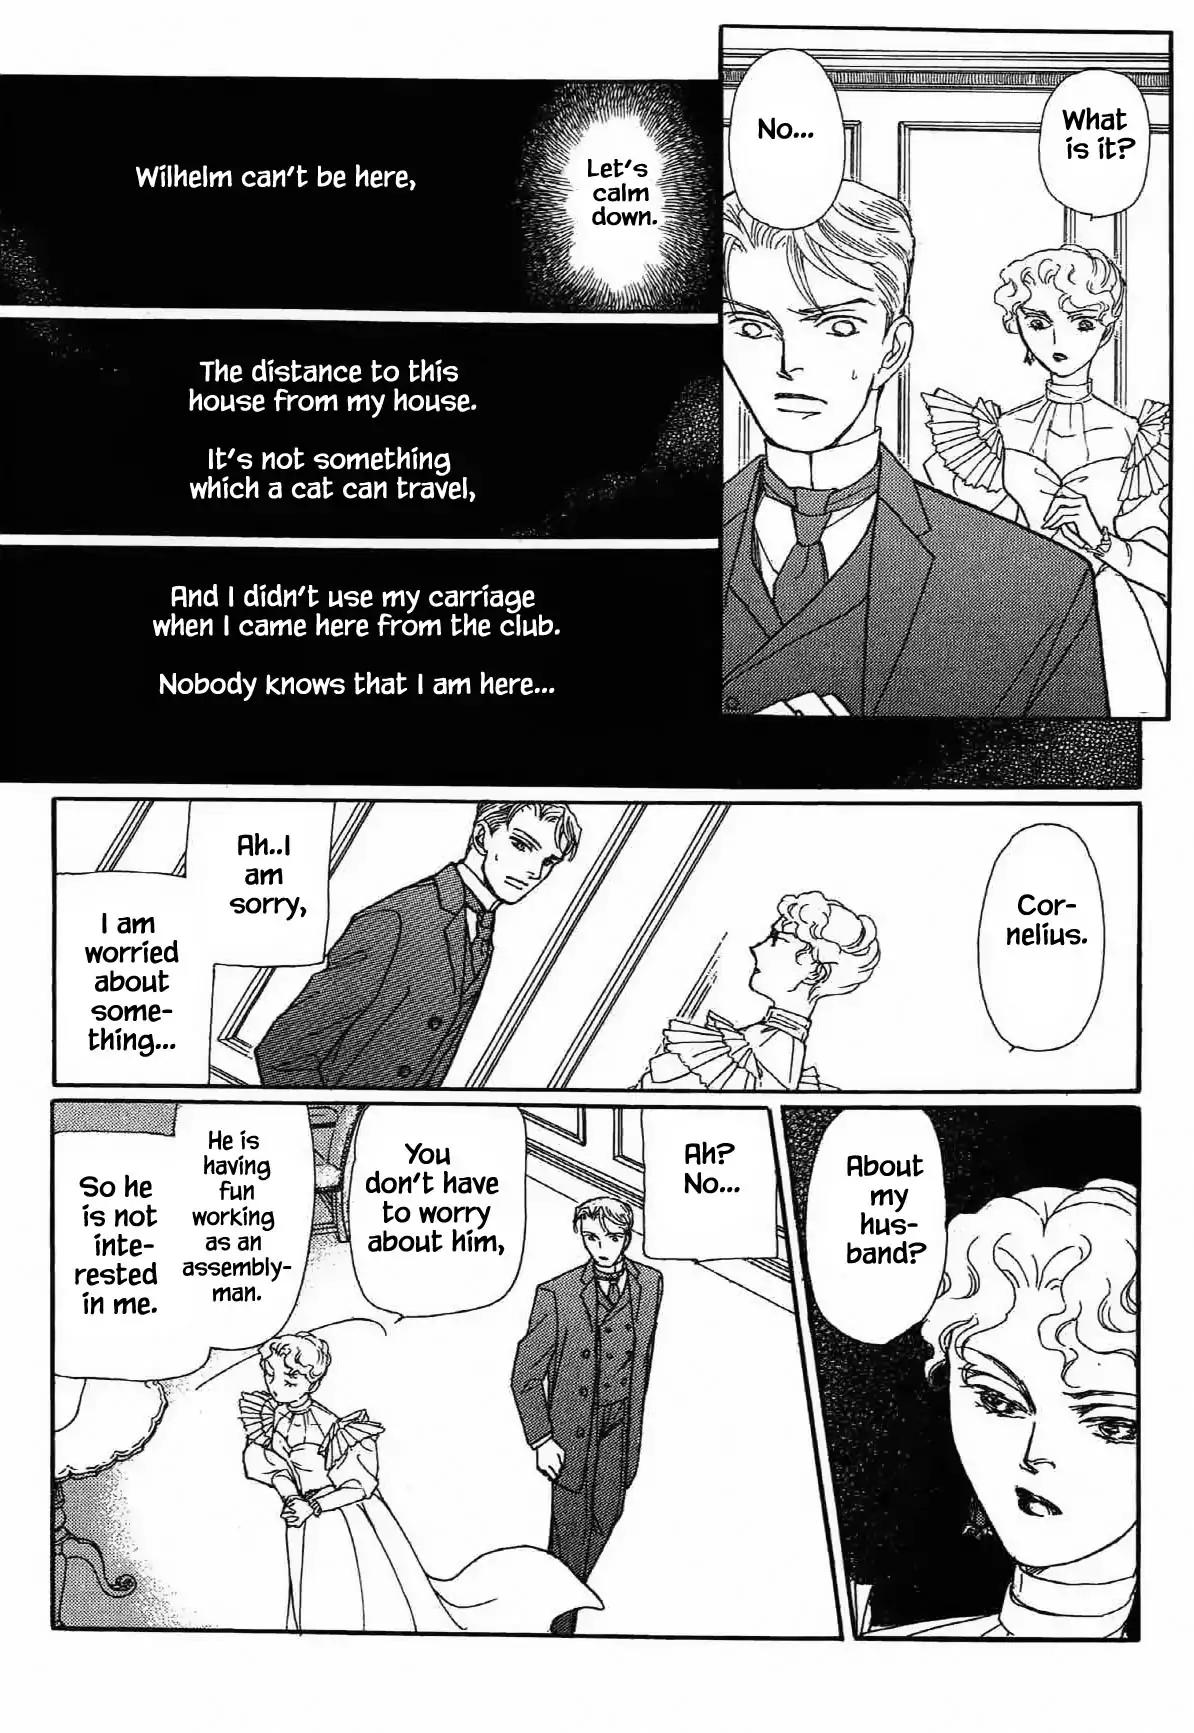 Beautiful England Series Vol.2 Chapter 12: